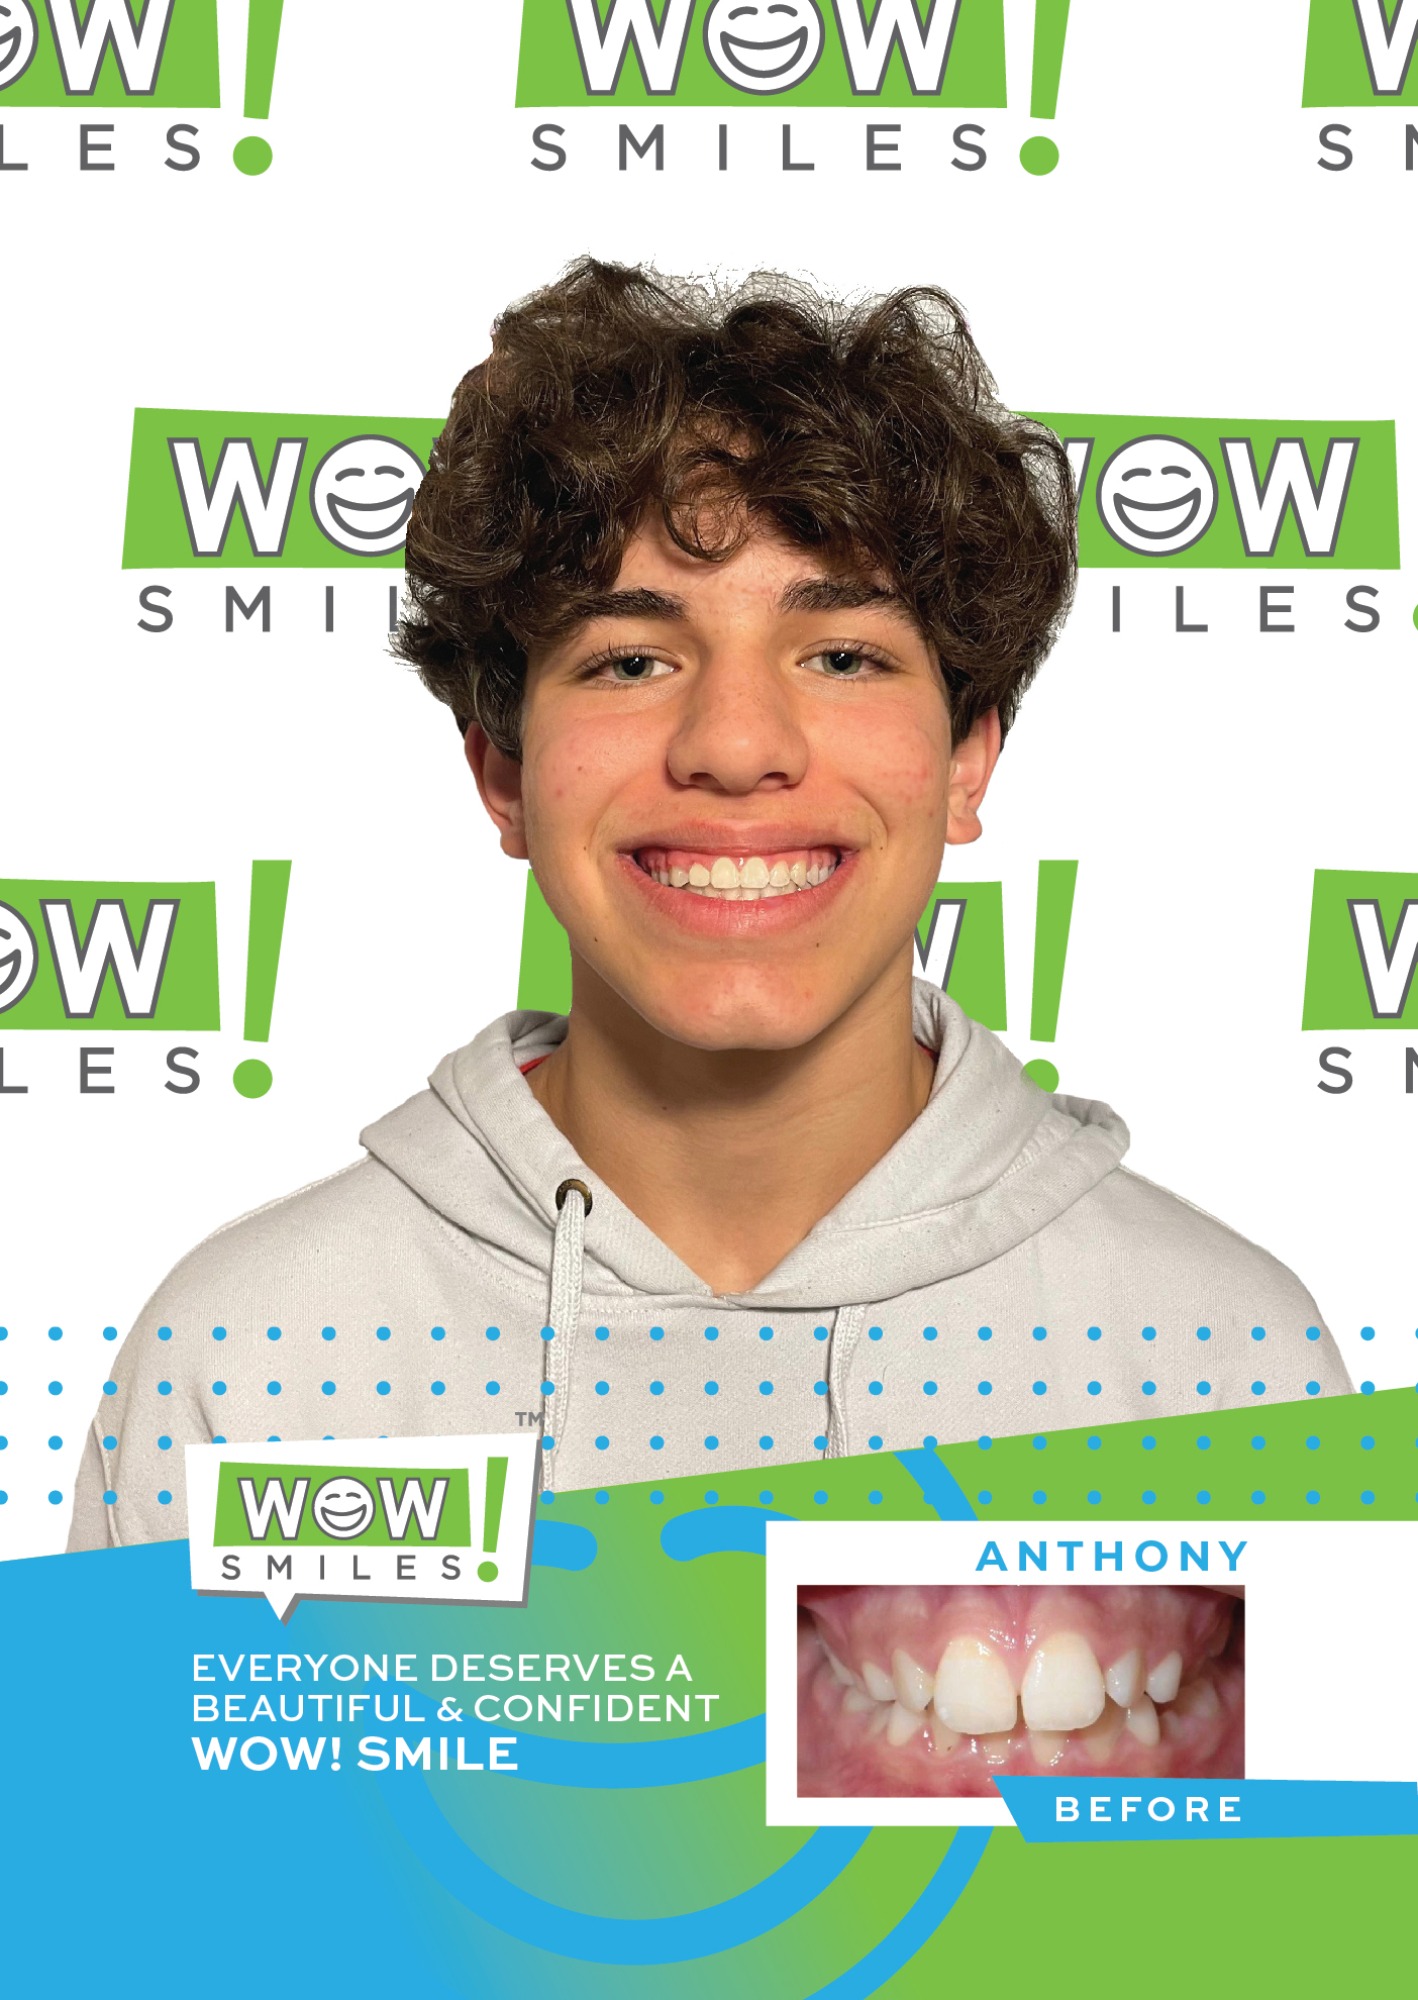 2022-07-20_Wow Smiles_Before and After Posters_Anthony_CC-01